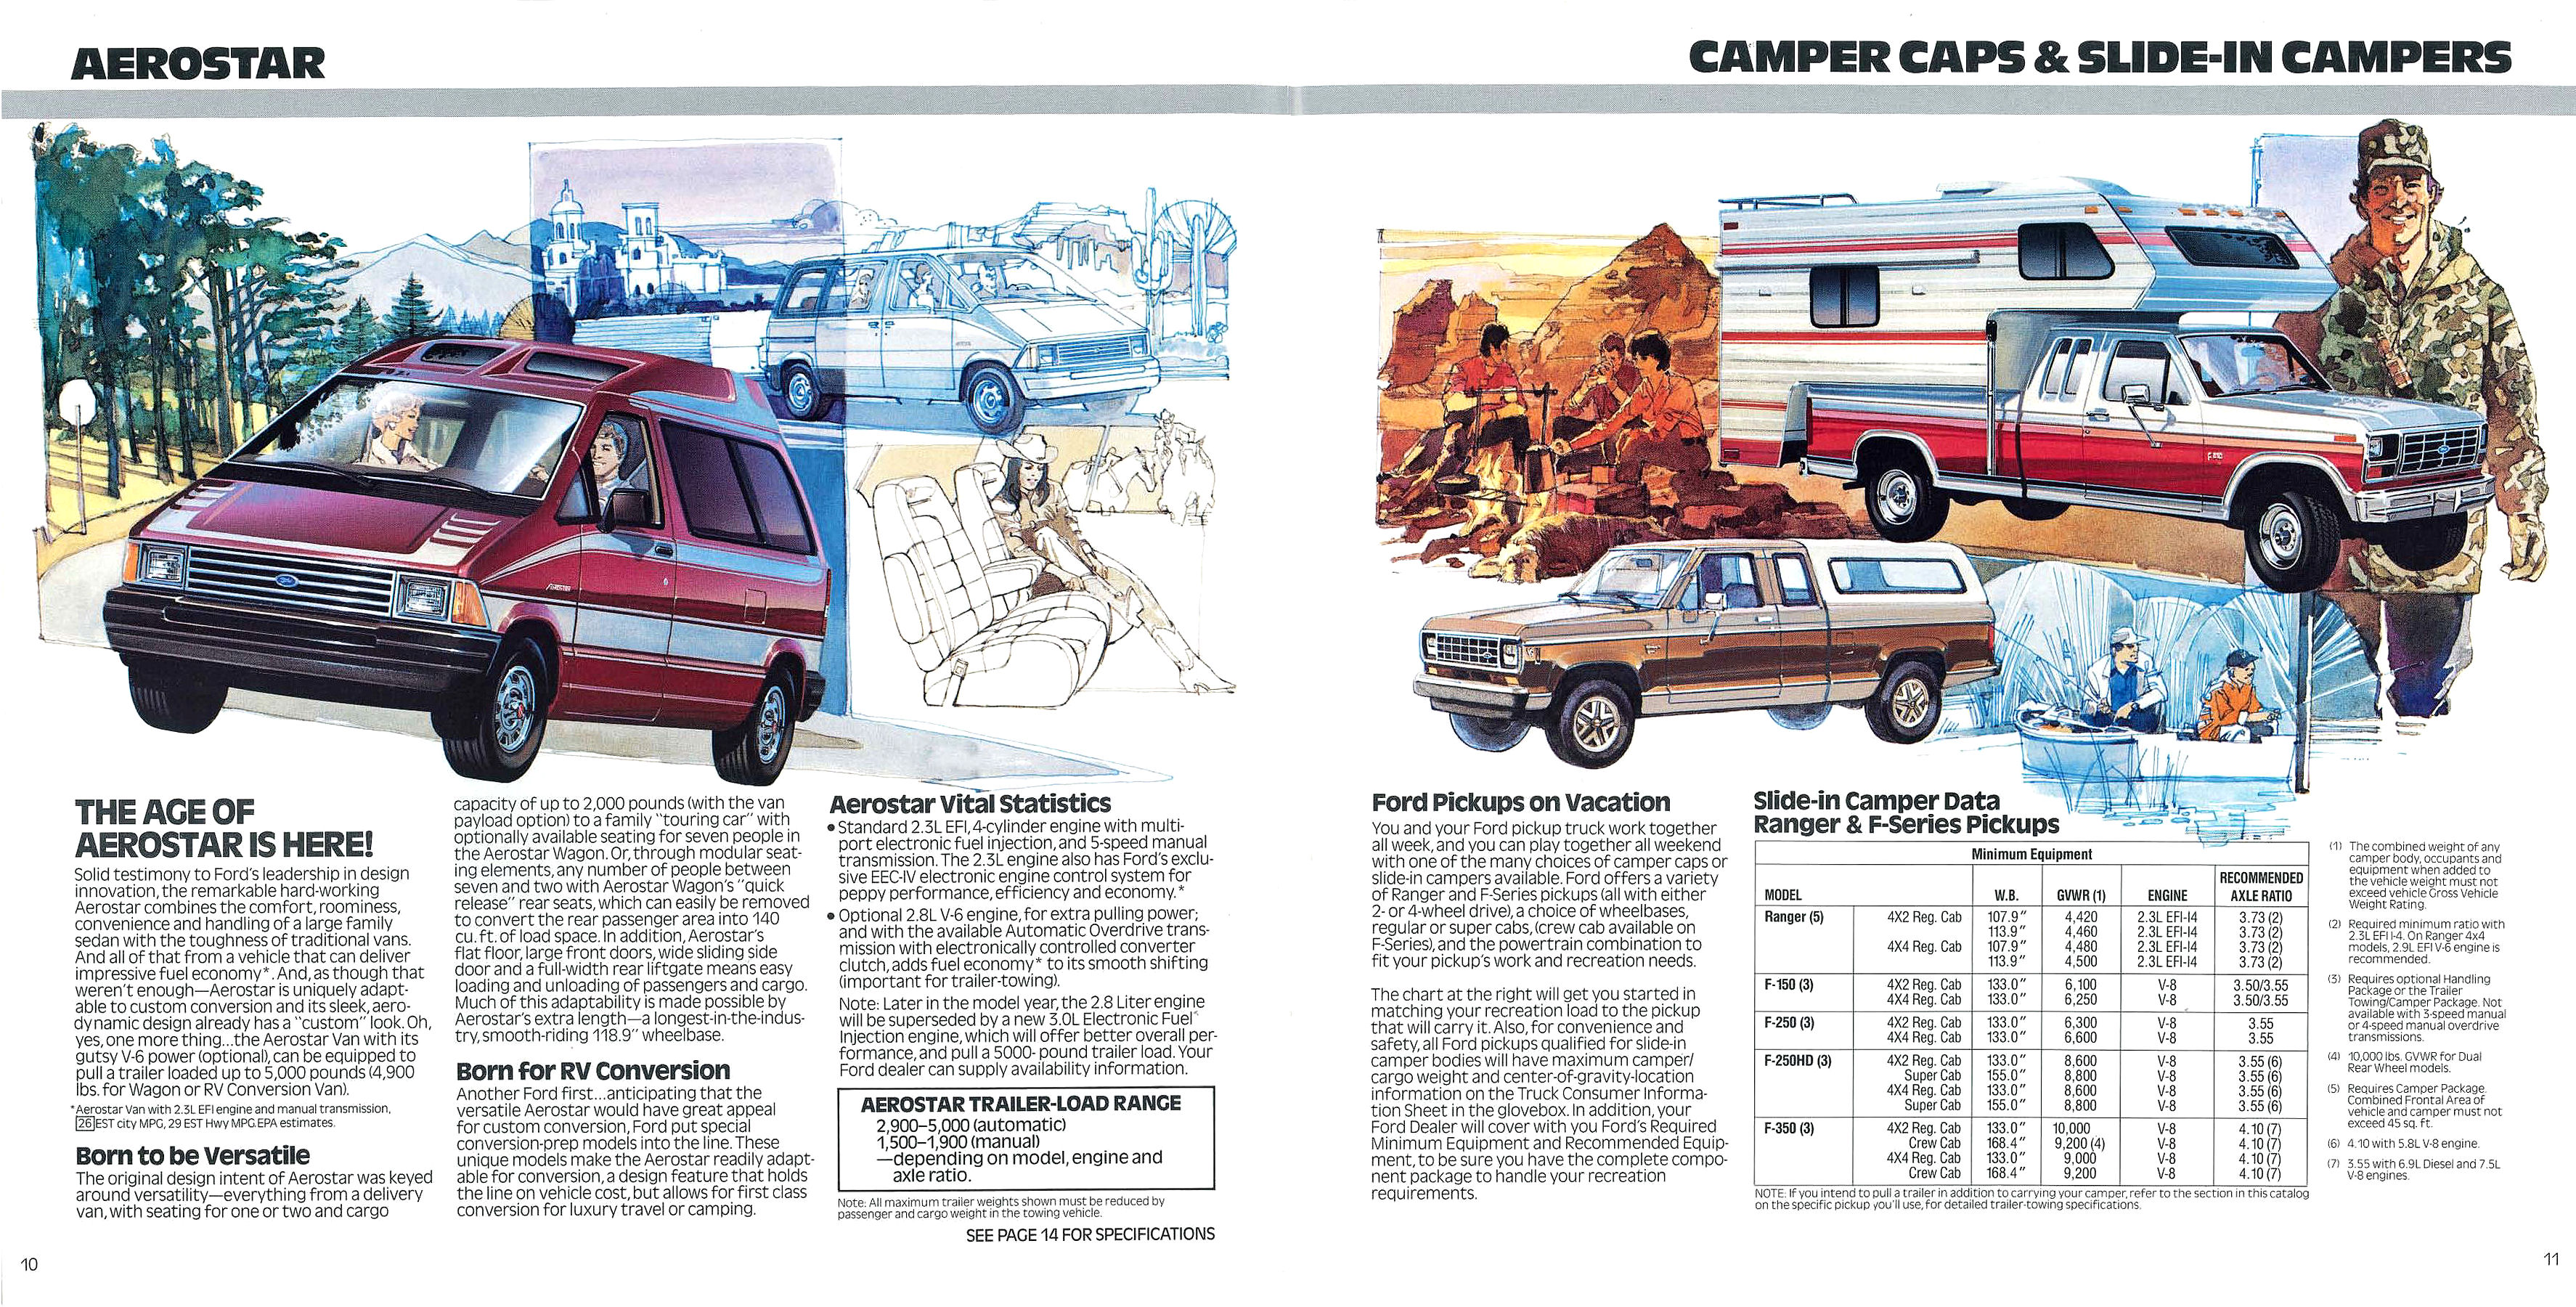 1986 Ford RV & Trailer Towing Guide-10-11